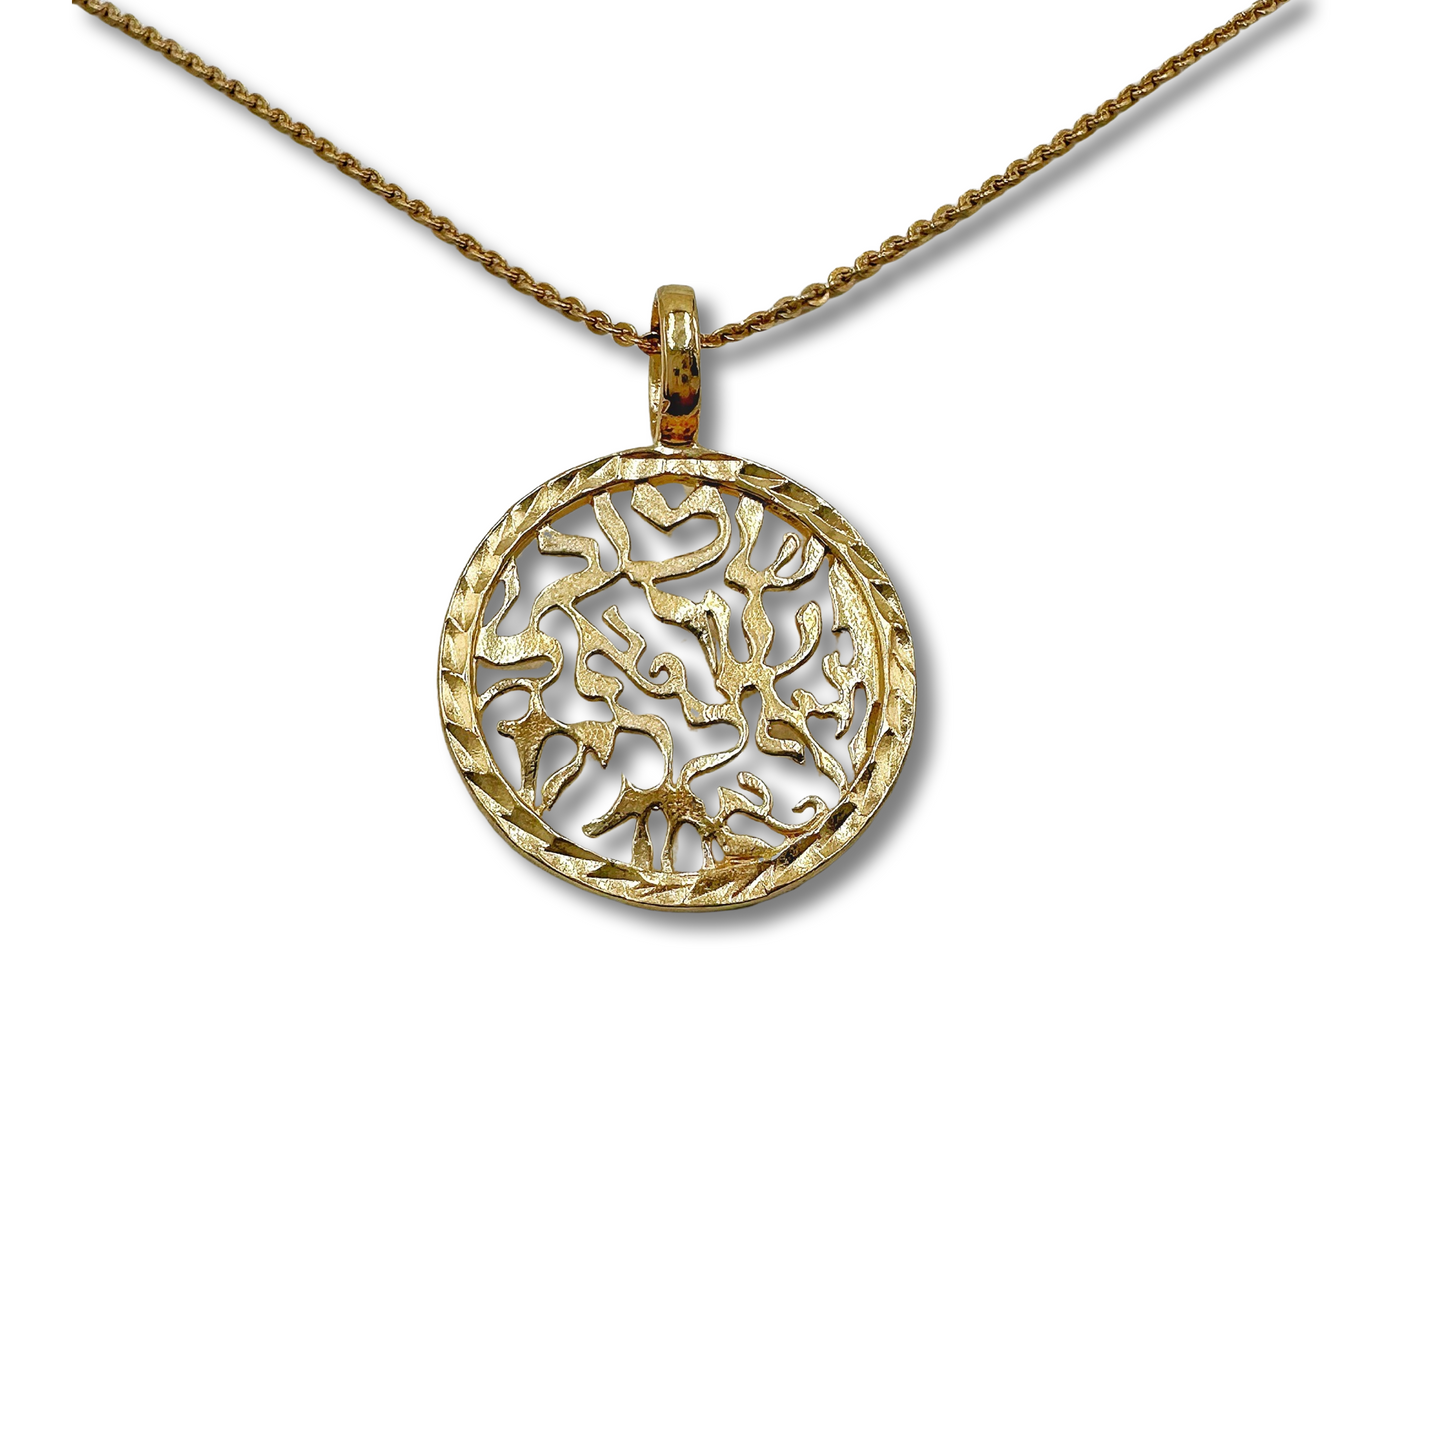 Shema Israel Sterling Silver Necklace/Pendant